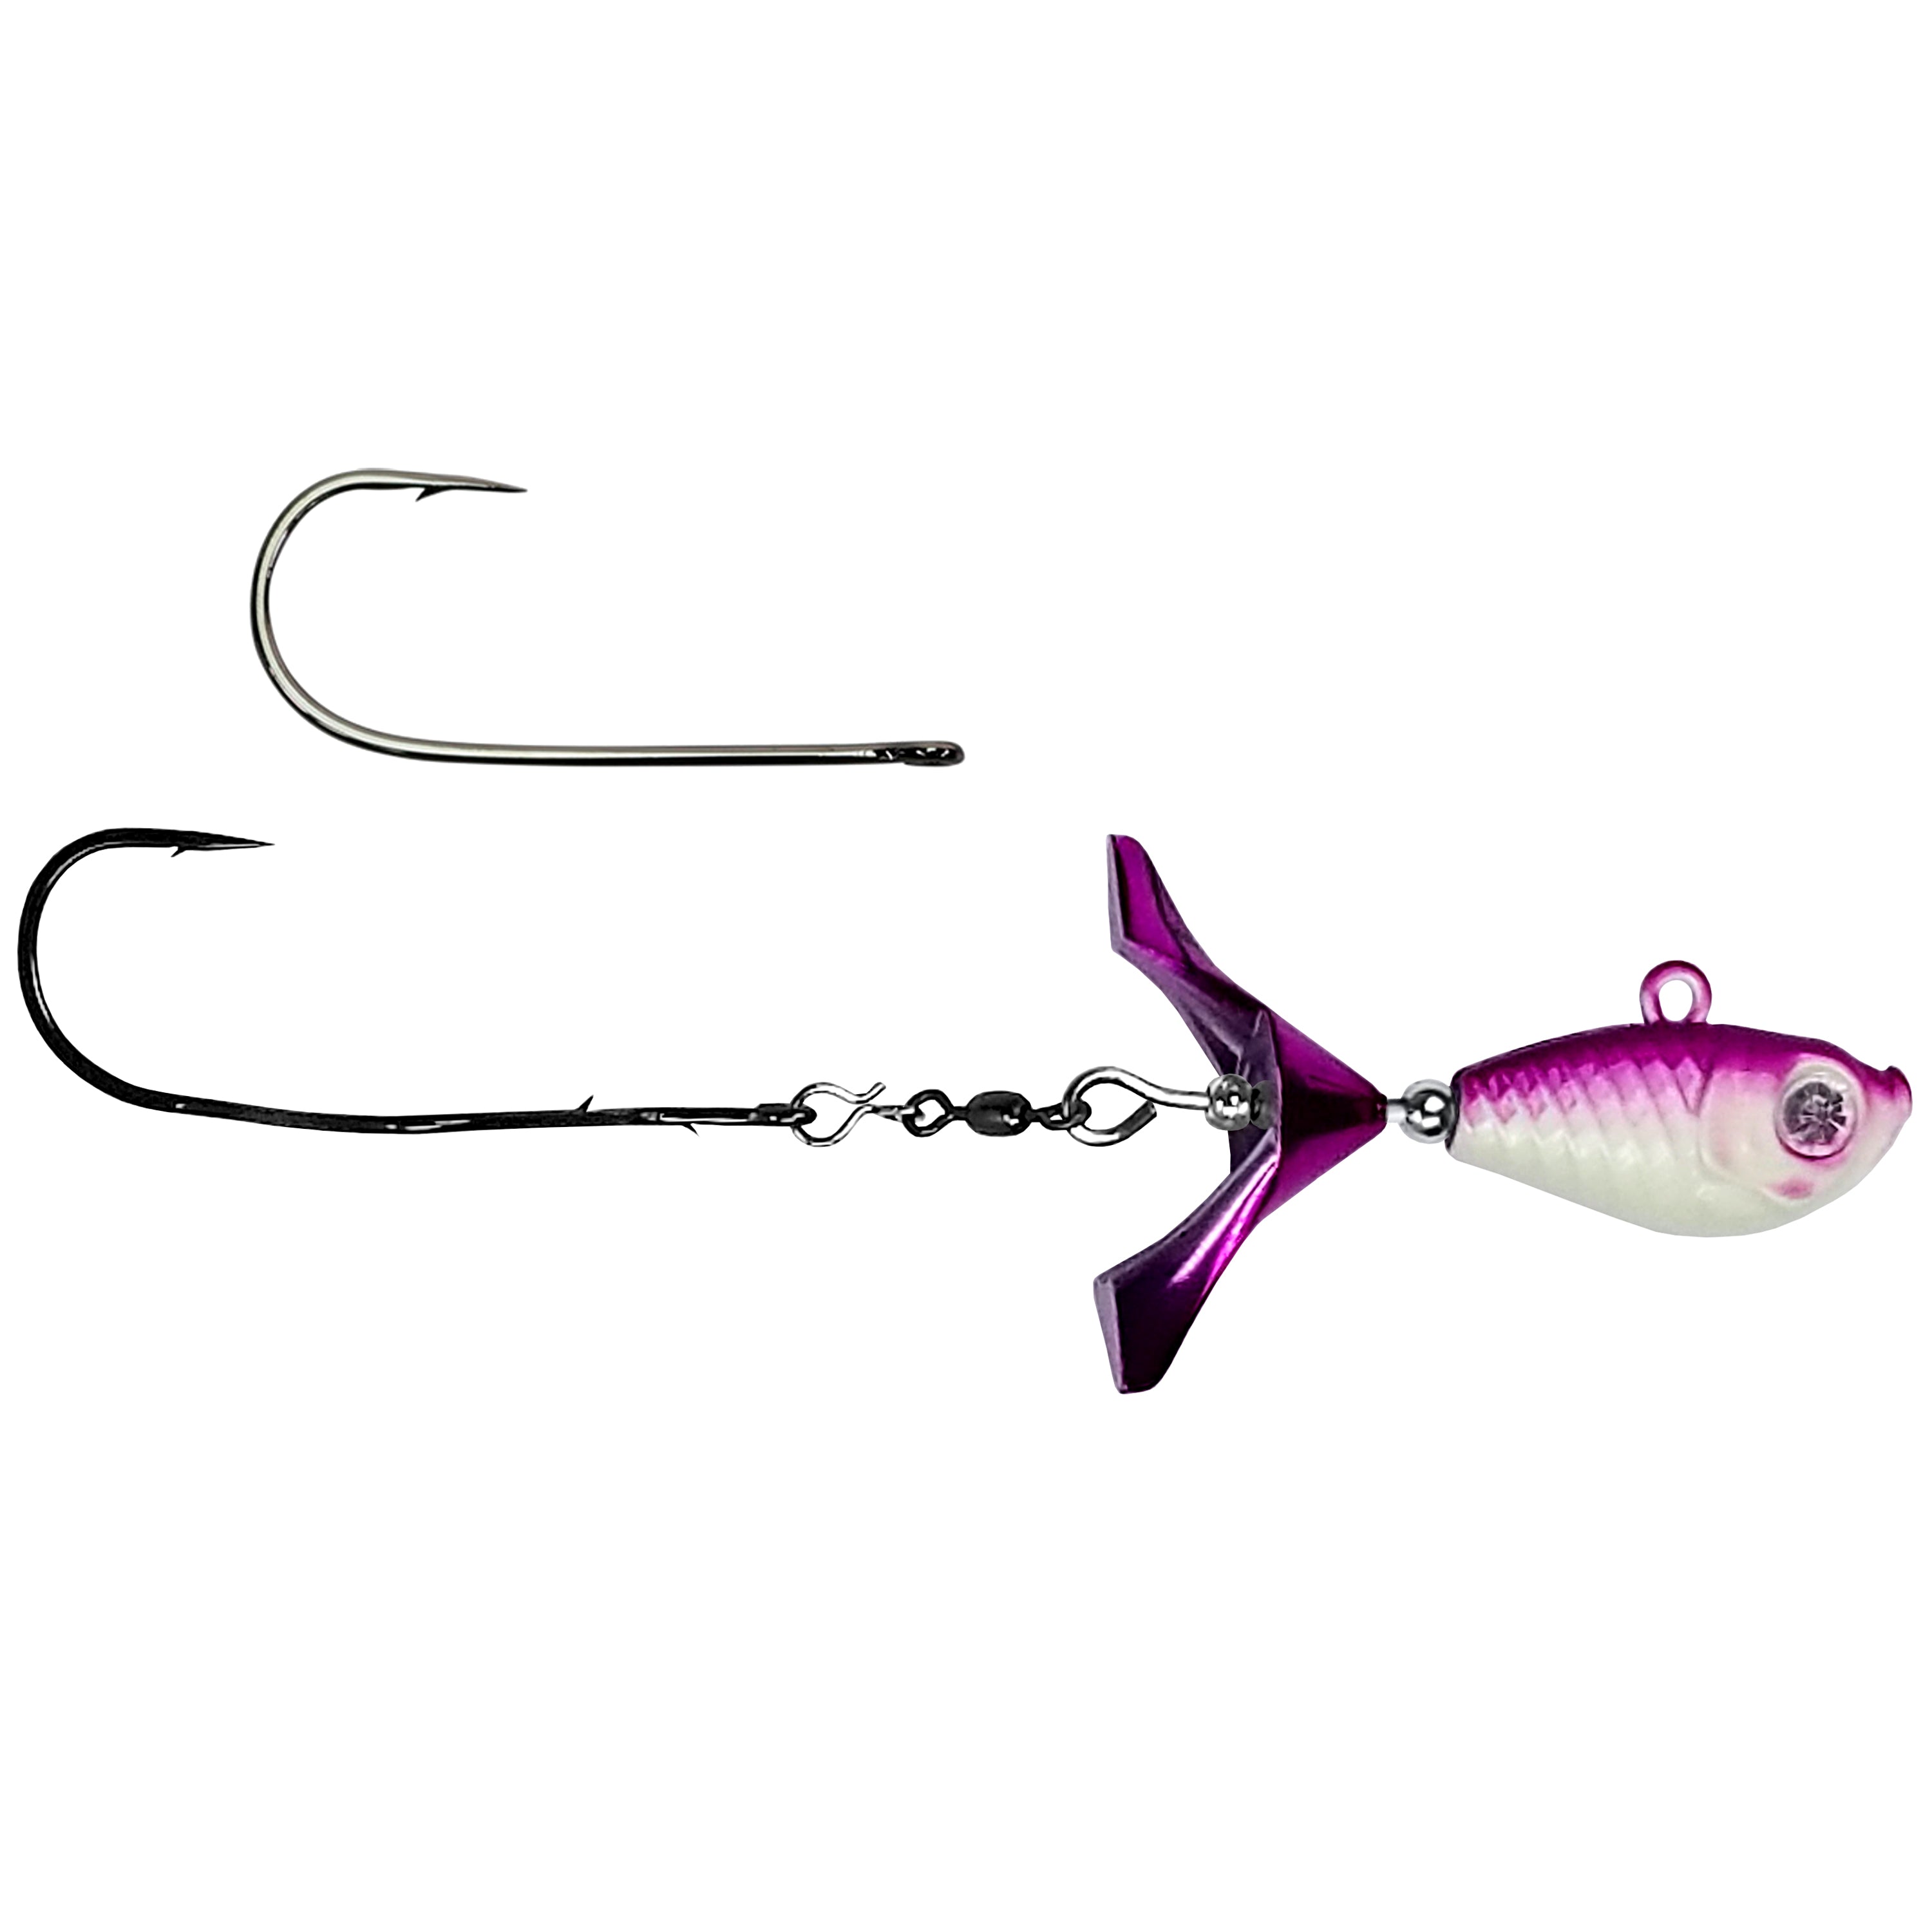 lookout Bite Trolling Lure 5.5 Inch [CTTLSQ521] - $4.99 : Almost Alive  Lures, The best there ever was.